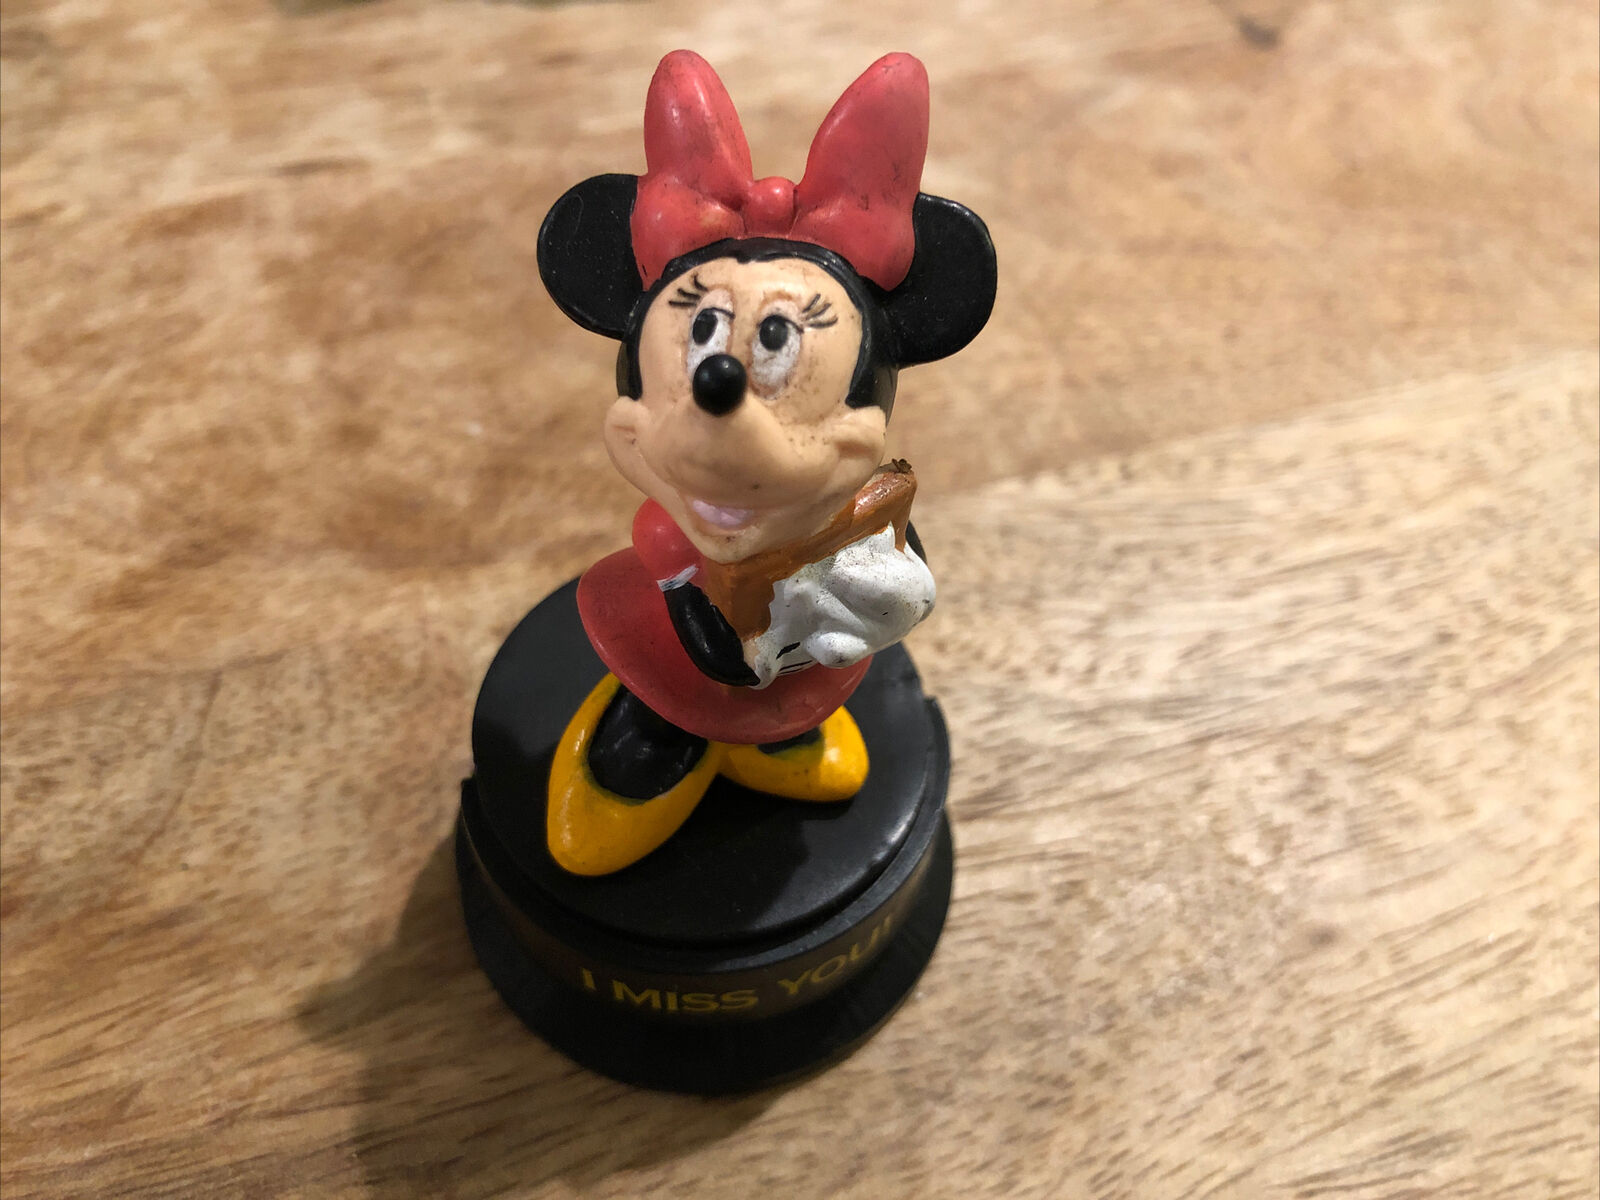 Vintage Disney Minnie Mouse I Miss You Trophy PVC Figure by Applause 3¼in